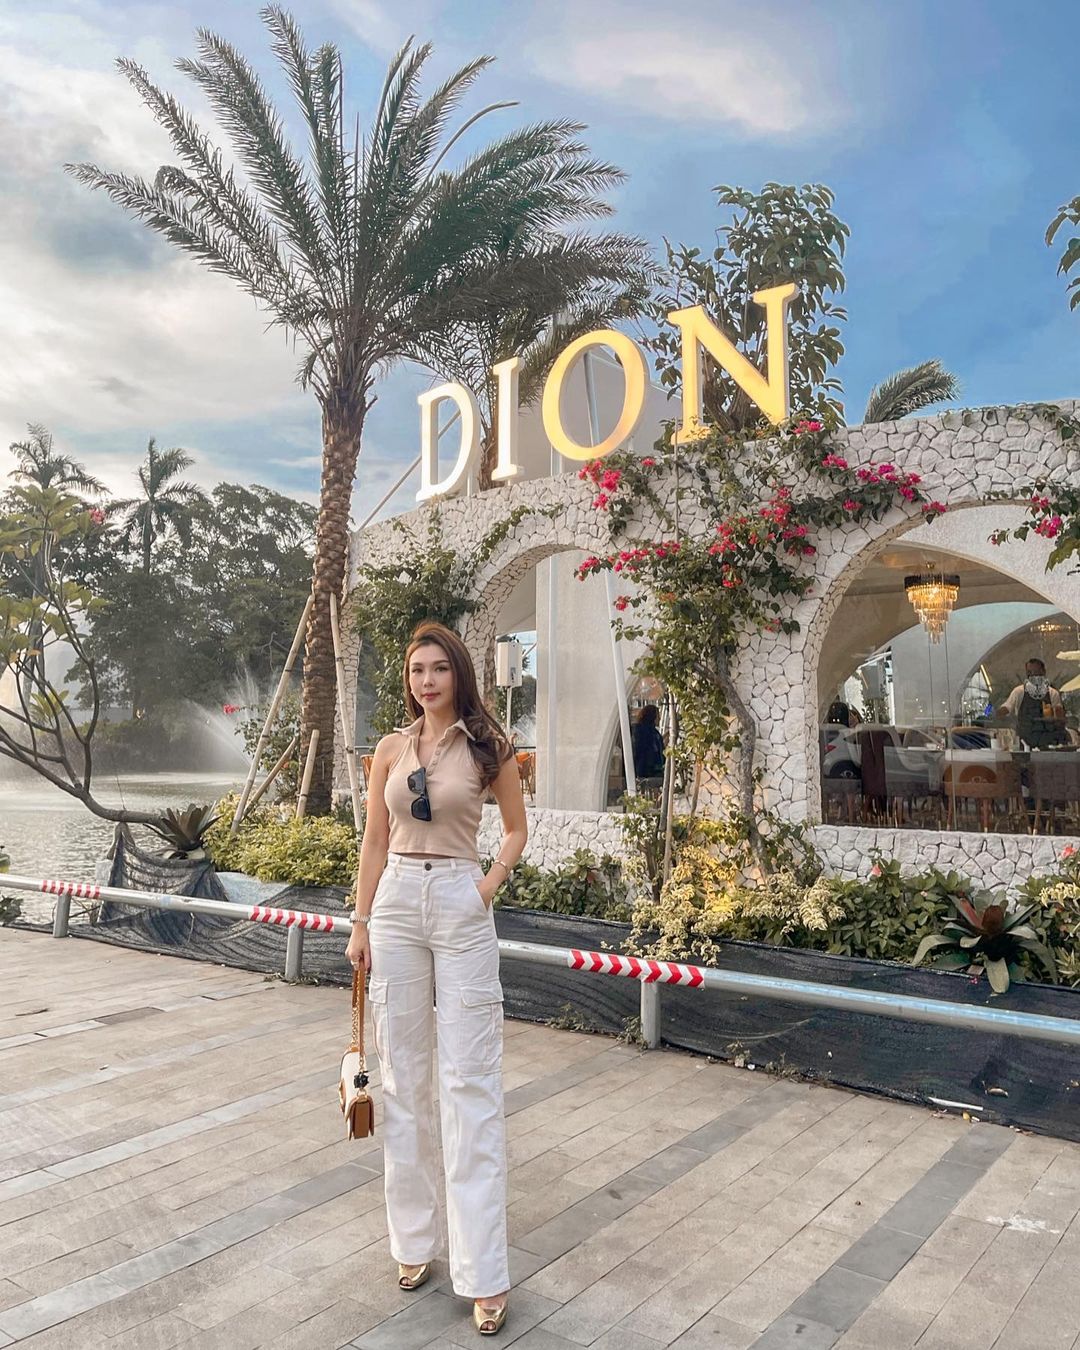 Review DION Senayan Park Image From @goldmillie